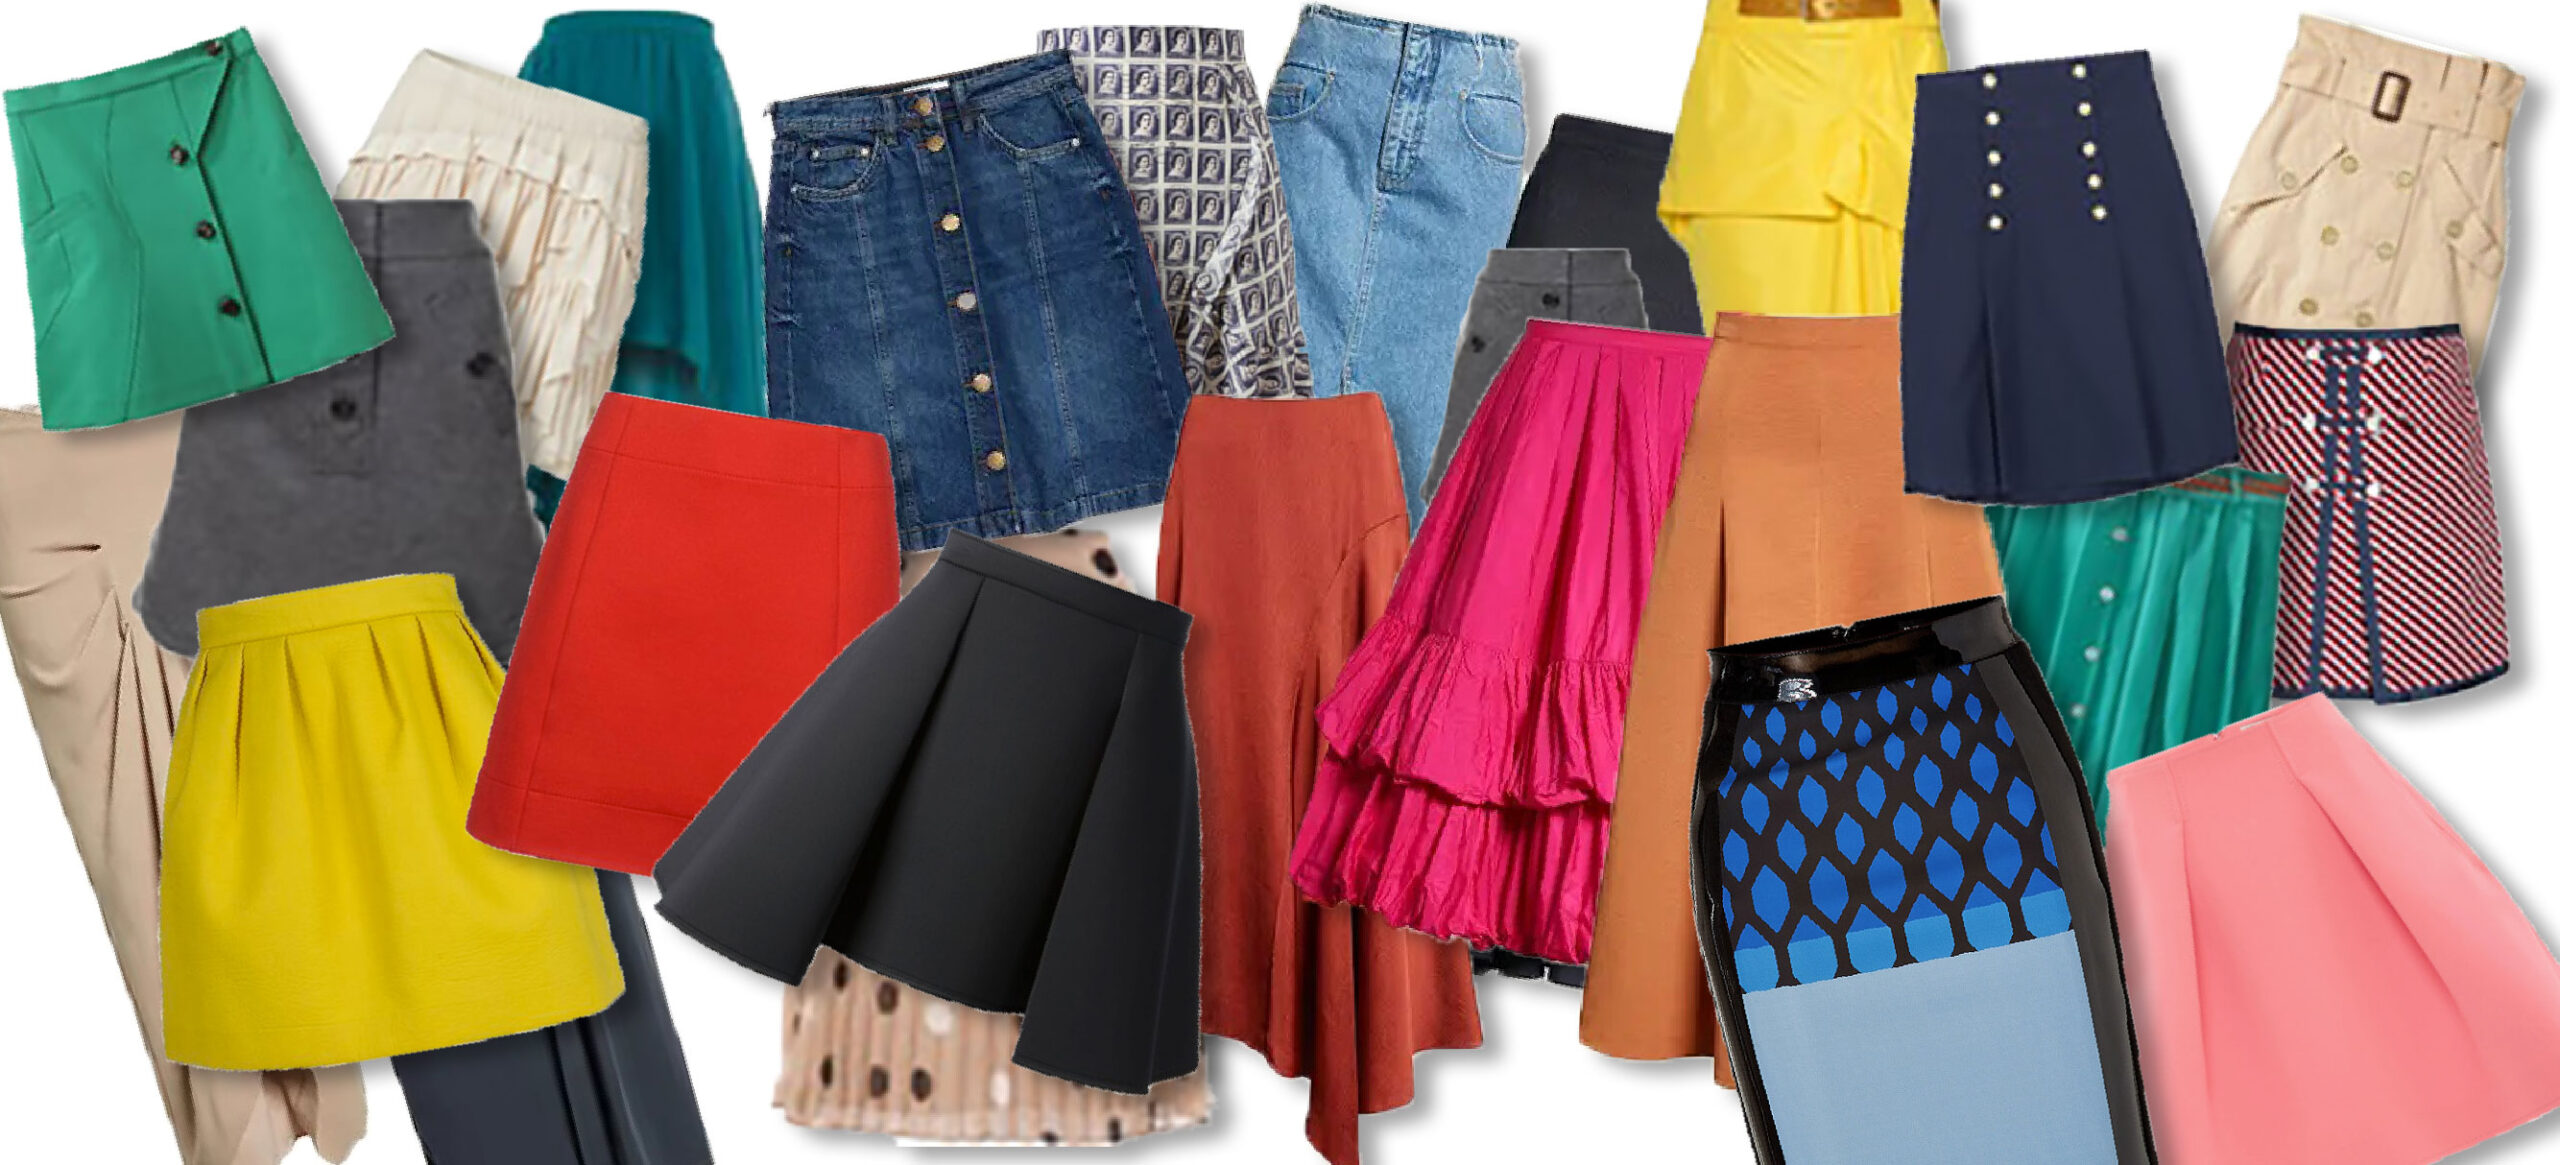 SKIRT TRENDS YOU MUST HAVE IN YOUR WARDROBE THIS FALL - el aviso ...